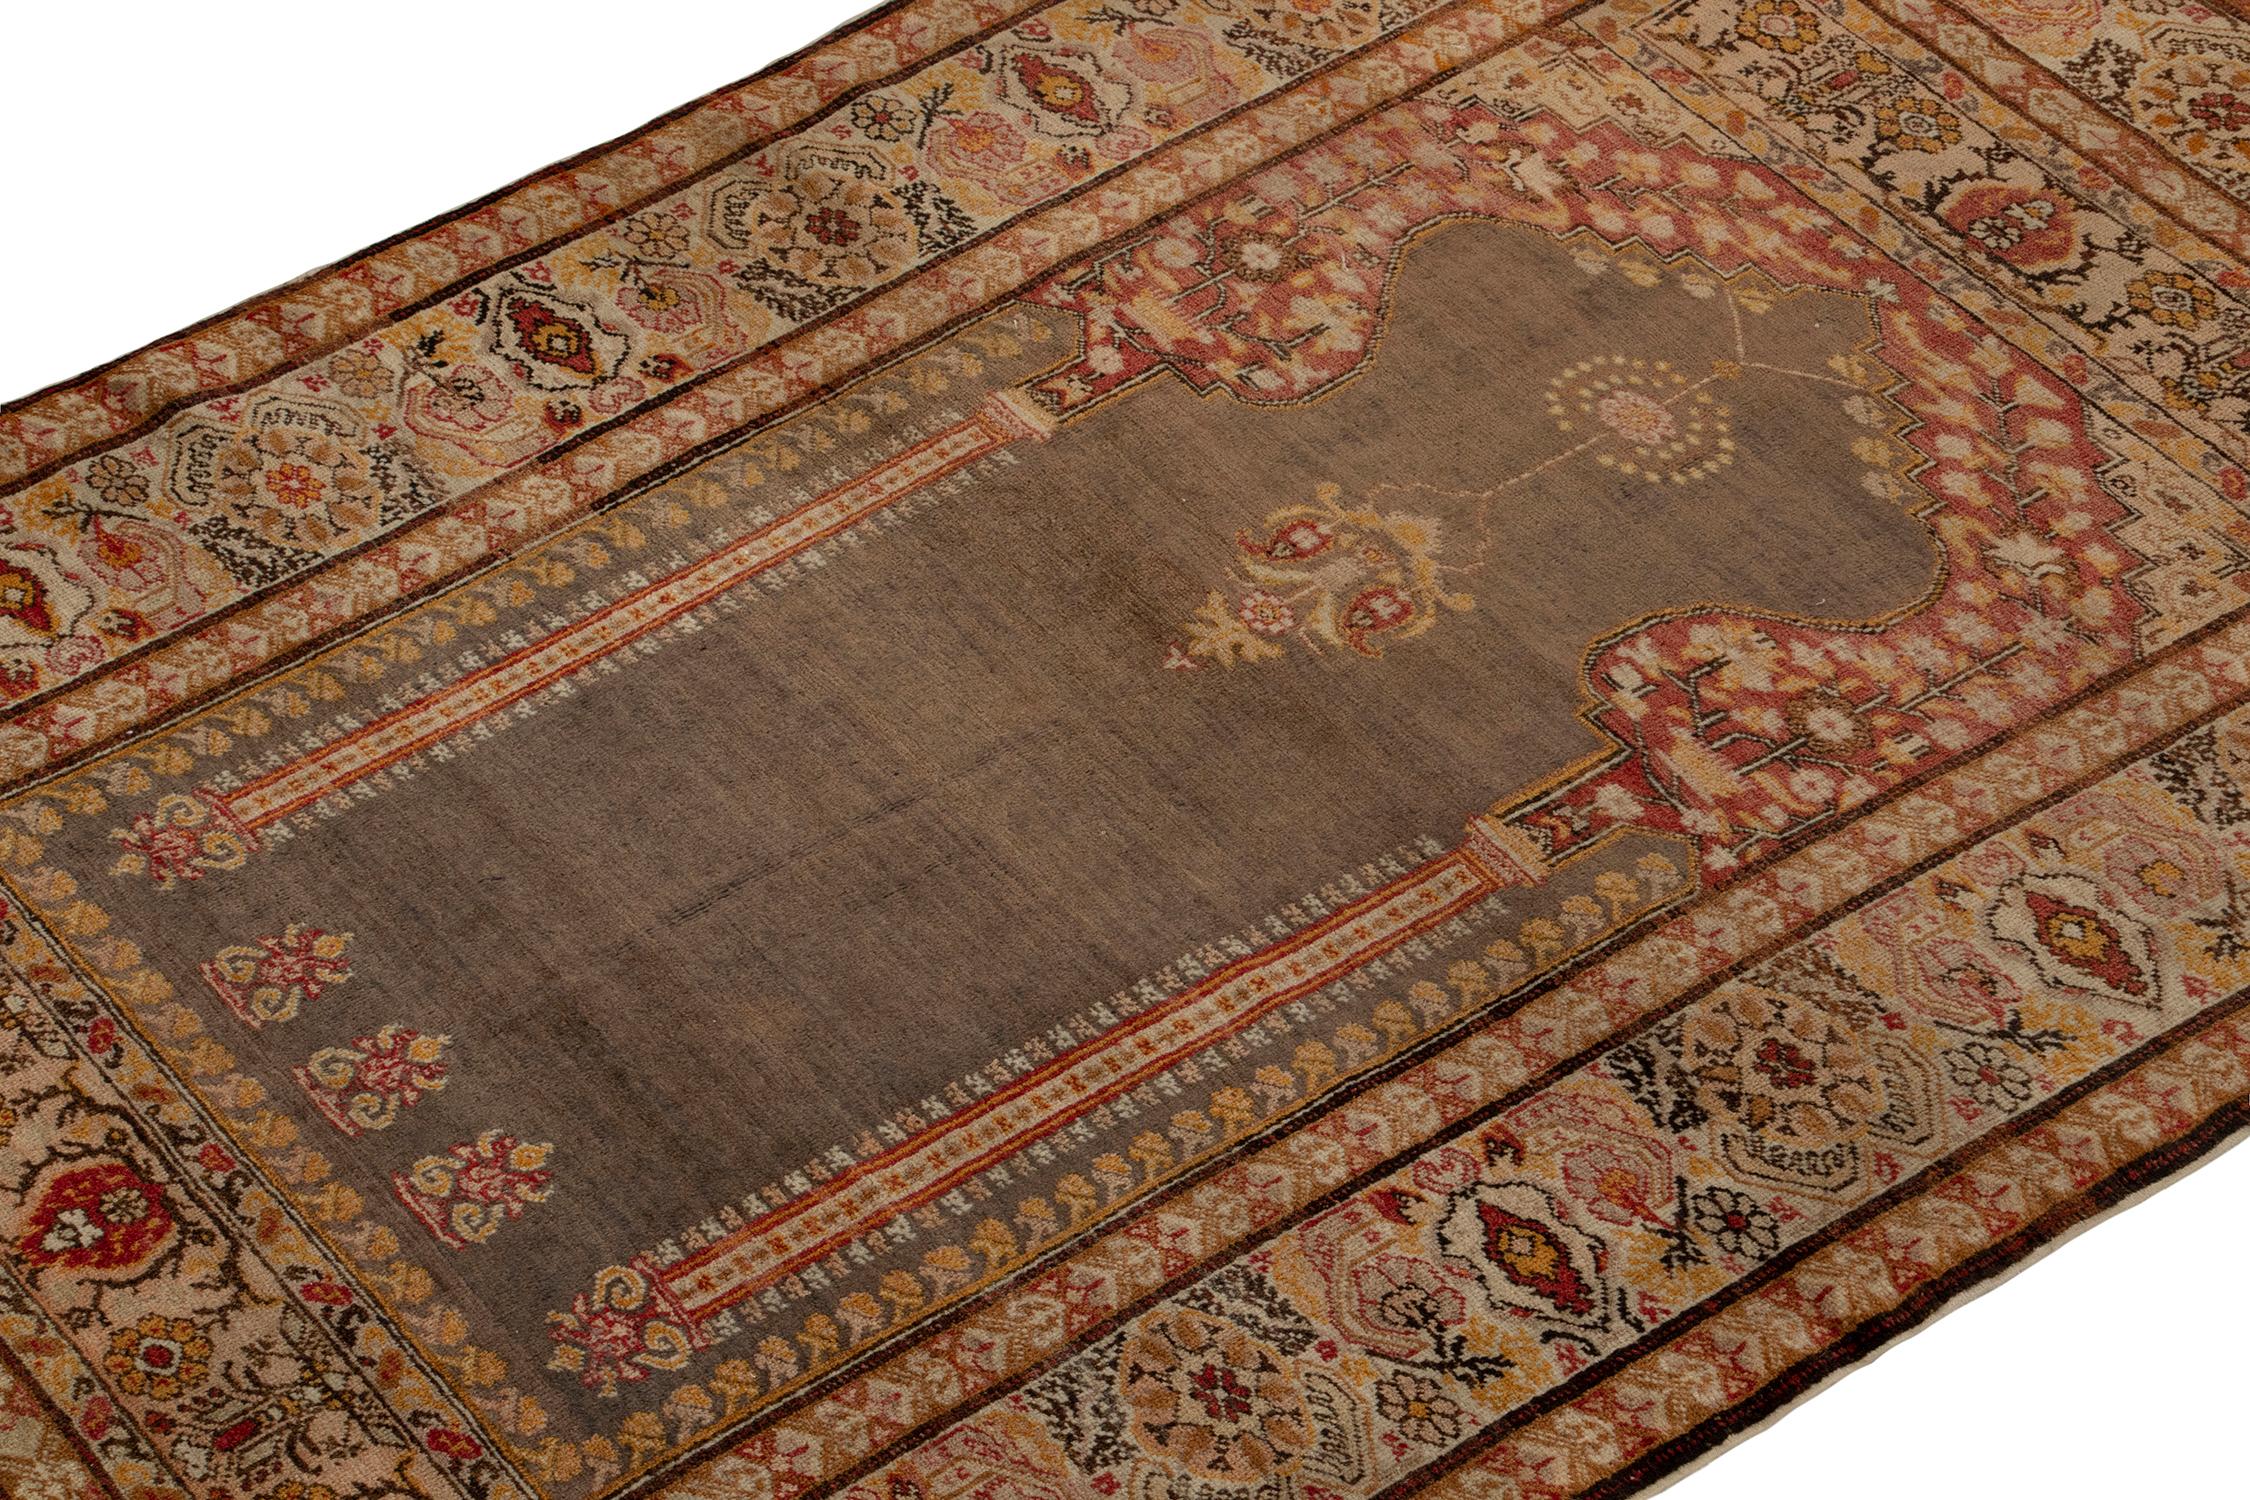 Hand-Woven Antique Kayseri rug in Red, Gold & Beige Floral Patterns by Rug & Kilim For Sale